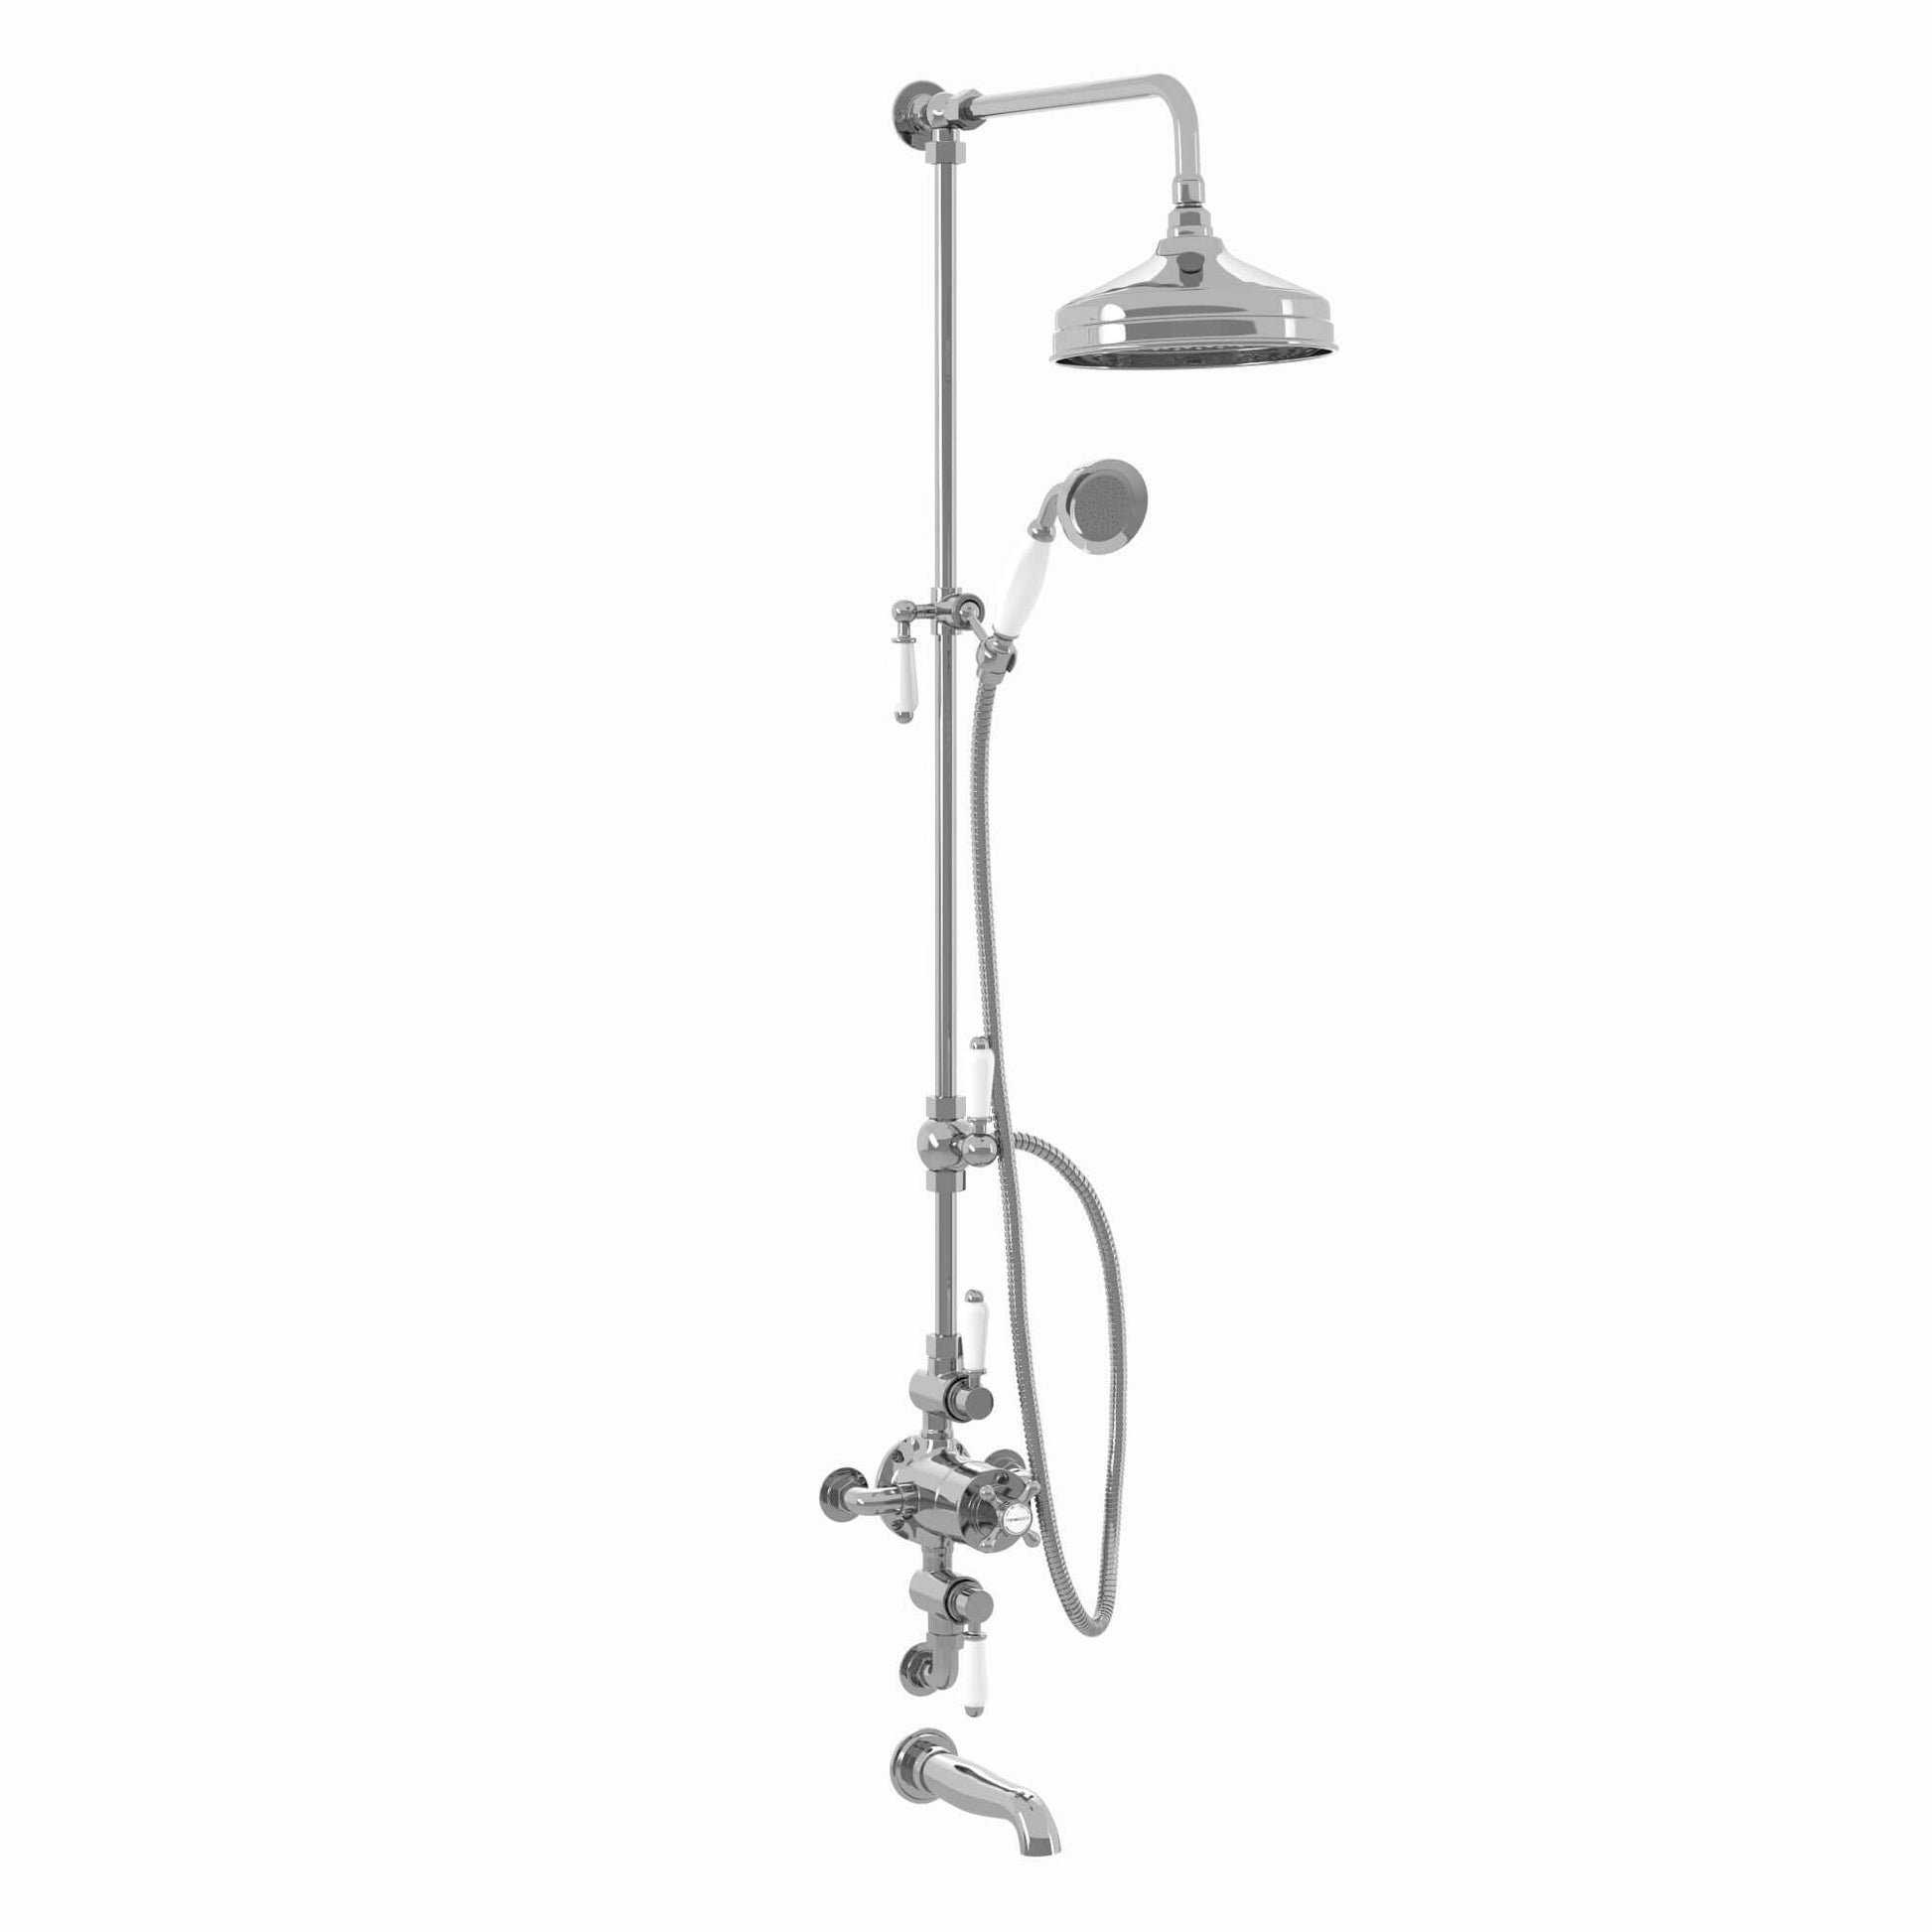 Downton Exposed Traditional Thermostatic Shower Set 3 Outlet, Incl. Triple Shower Valve, Rigid Riser Rail, 200mm Shower Head, Handset & Bath Filler - Chrome And White - Showers